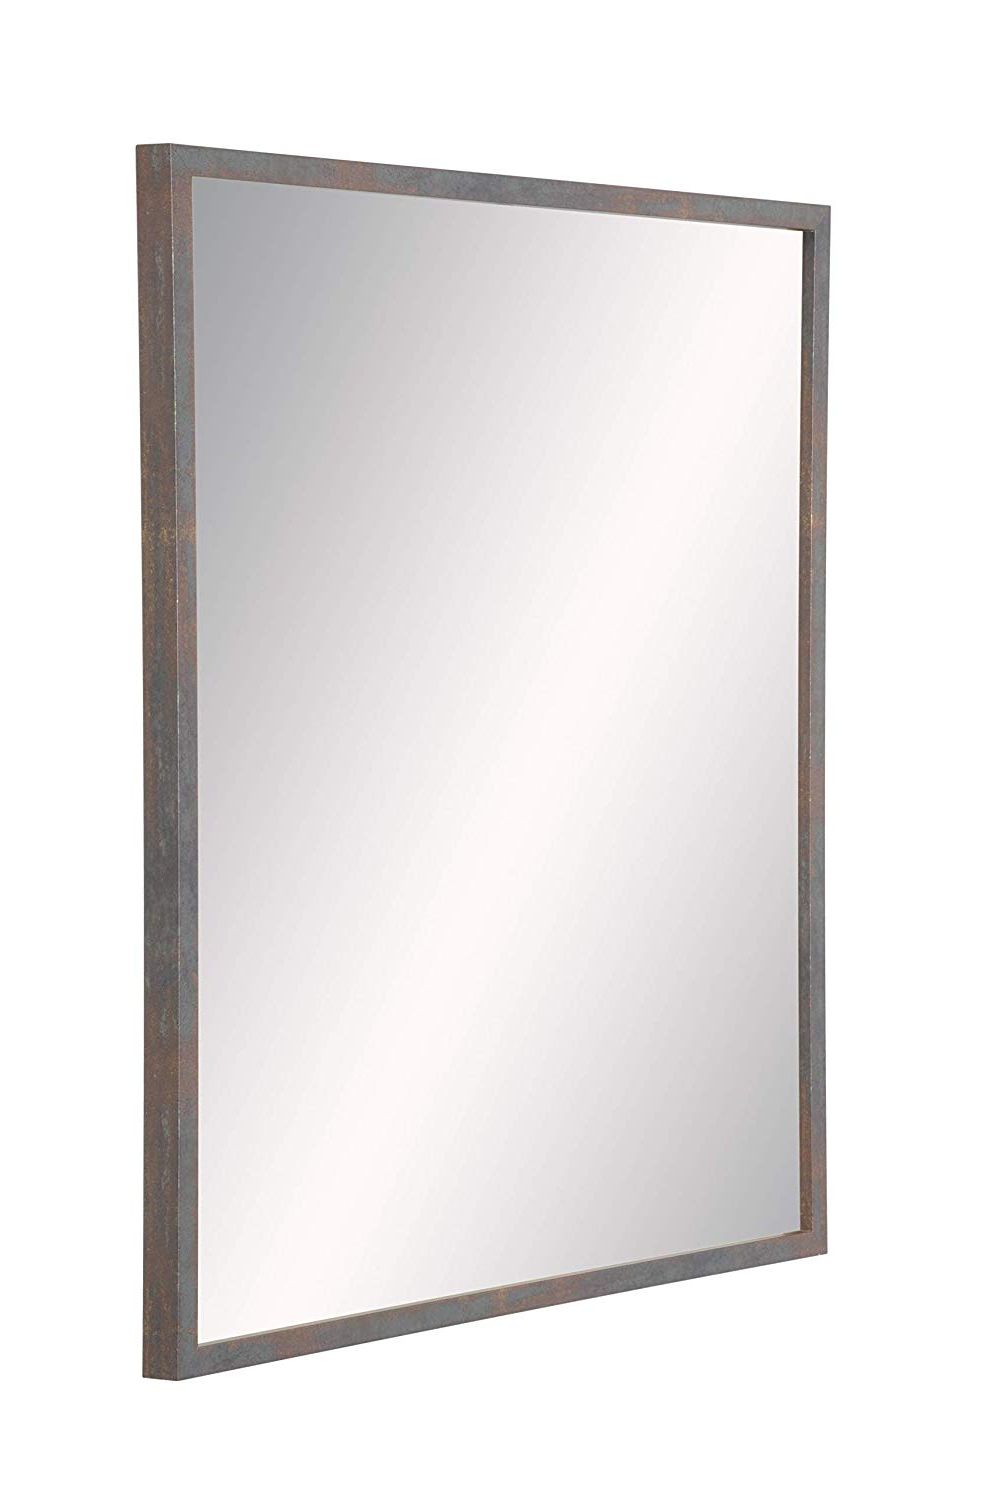 Industrial Wall Mirrors Intended For Popular Amazon: Brandtworks Modern Industrial Wall Mirror: Home & Kitchen (View 10 of 20)